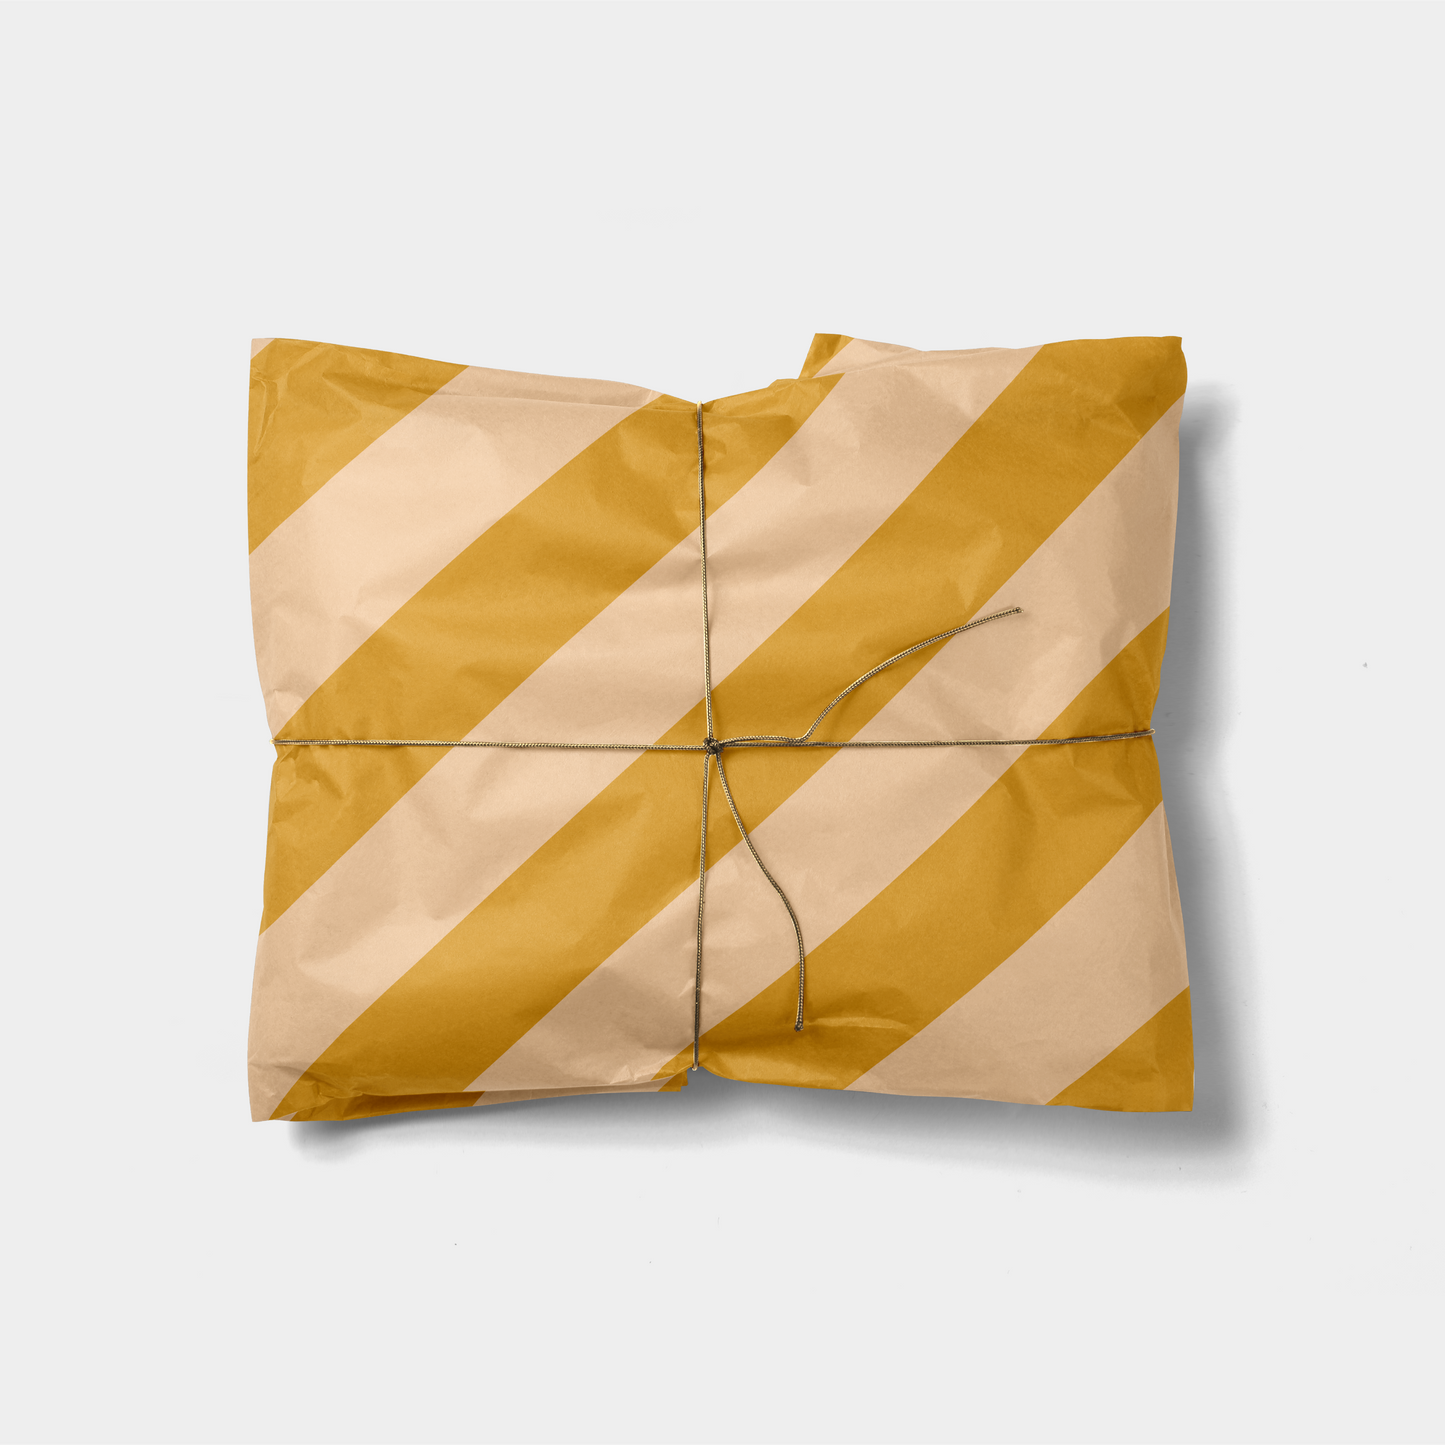 Sandy Brown and Peach Colorful Striped-Gift Wrapping-The Design Craft